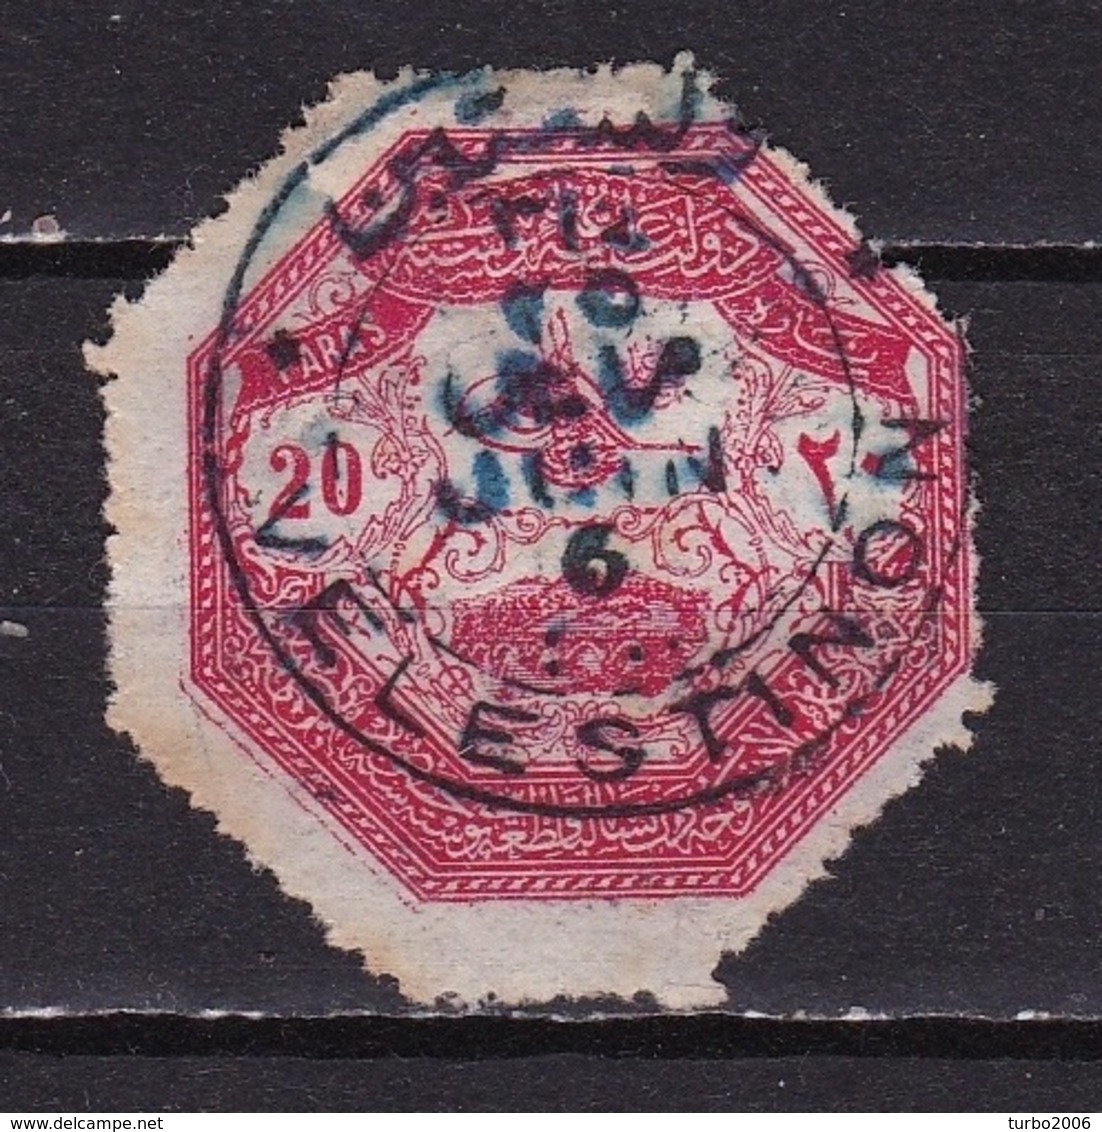 THESSALIA  1898 20 Pa Red Used VELESTINON By The Turkish Army Of Occupation During The Greek-Turkish War Of 1897 Vl. 2 - Thessaly